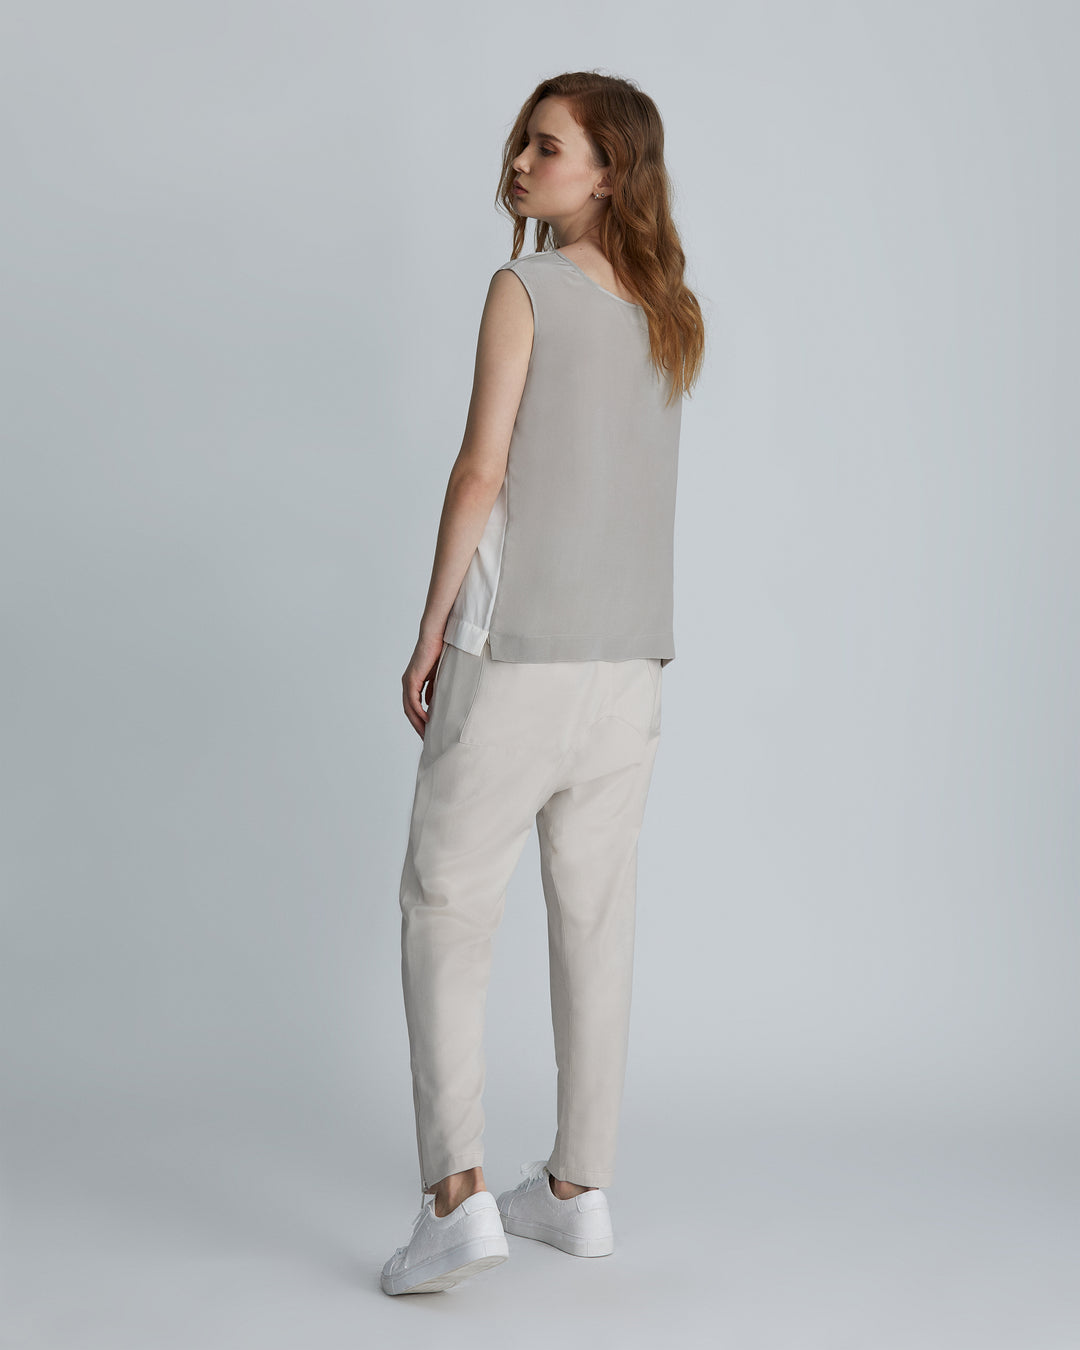 Woman modeling the High-rise Ivory tapered ankle women's lounge pants